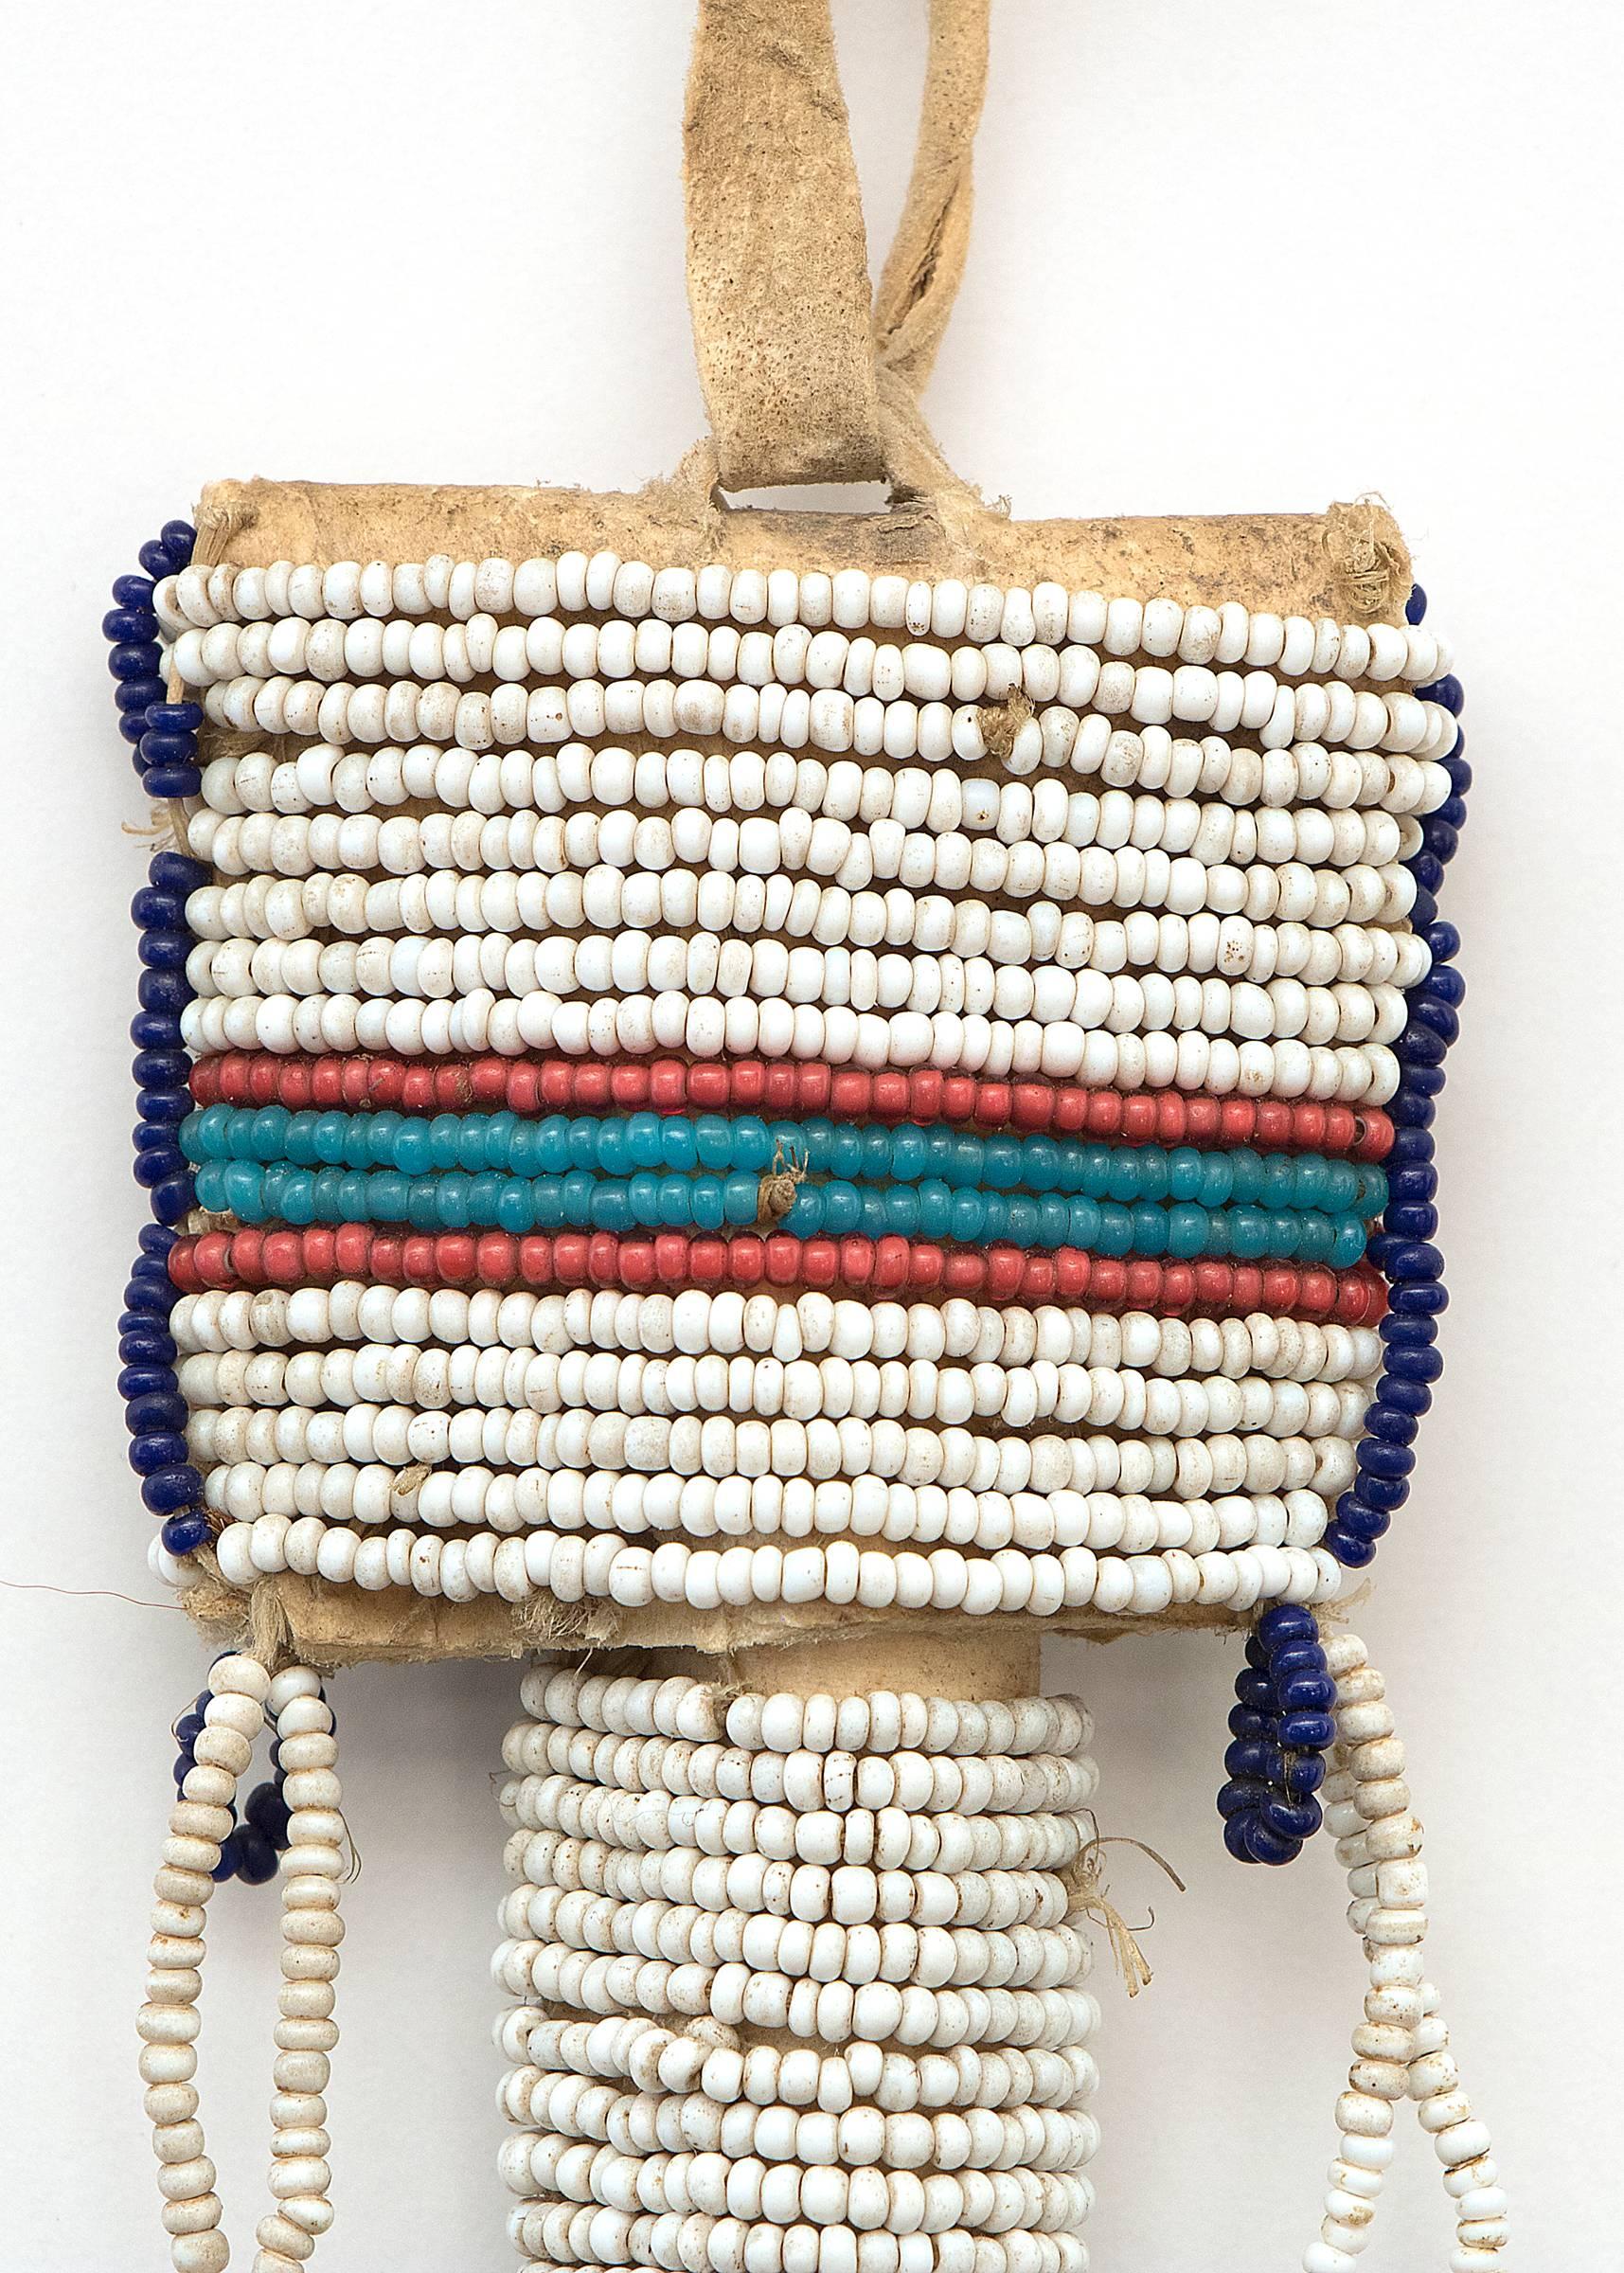 Antique 19th century Native American Sioux (Plains Indian) beadwork woman's awl case constructed of native tanned hide, sinew-sewn with trade beads in white, dark blue, Pony-Trader blue and white-heart red with tin cone tinklers. Cases like this